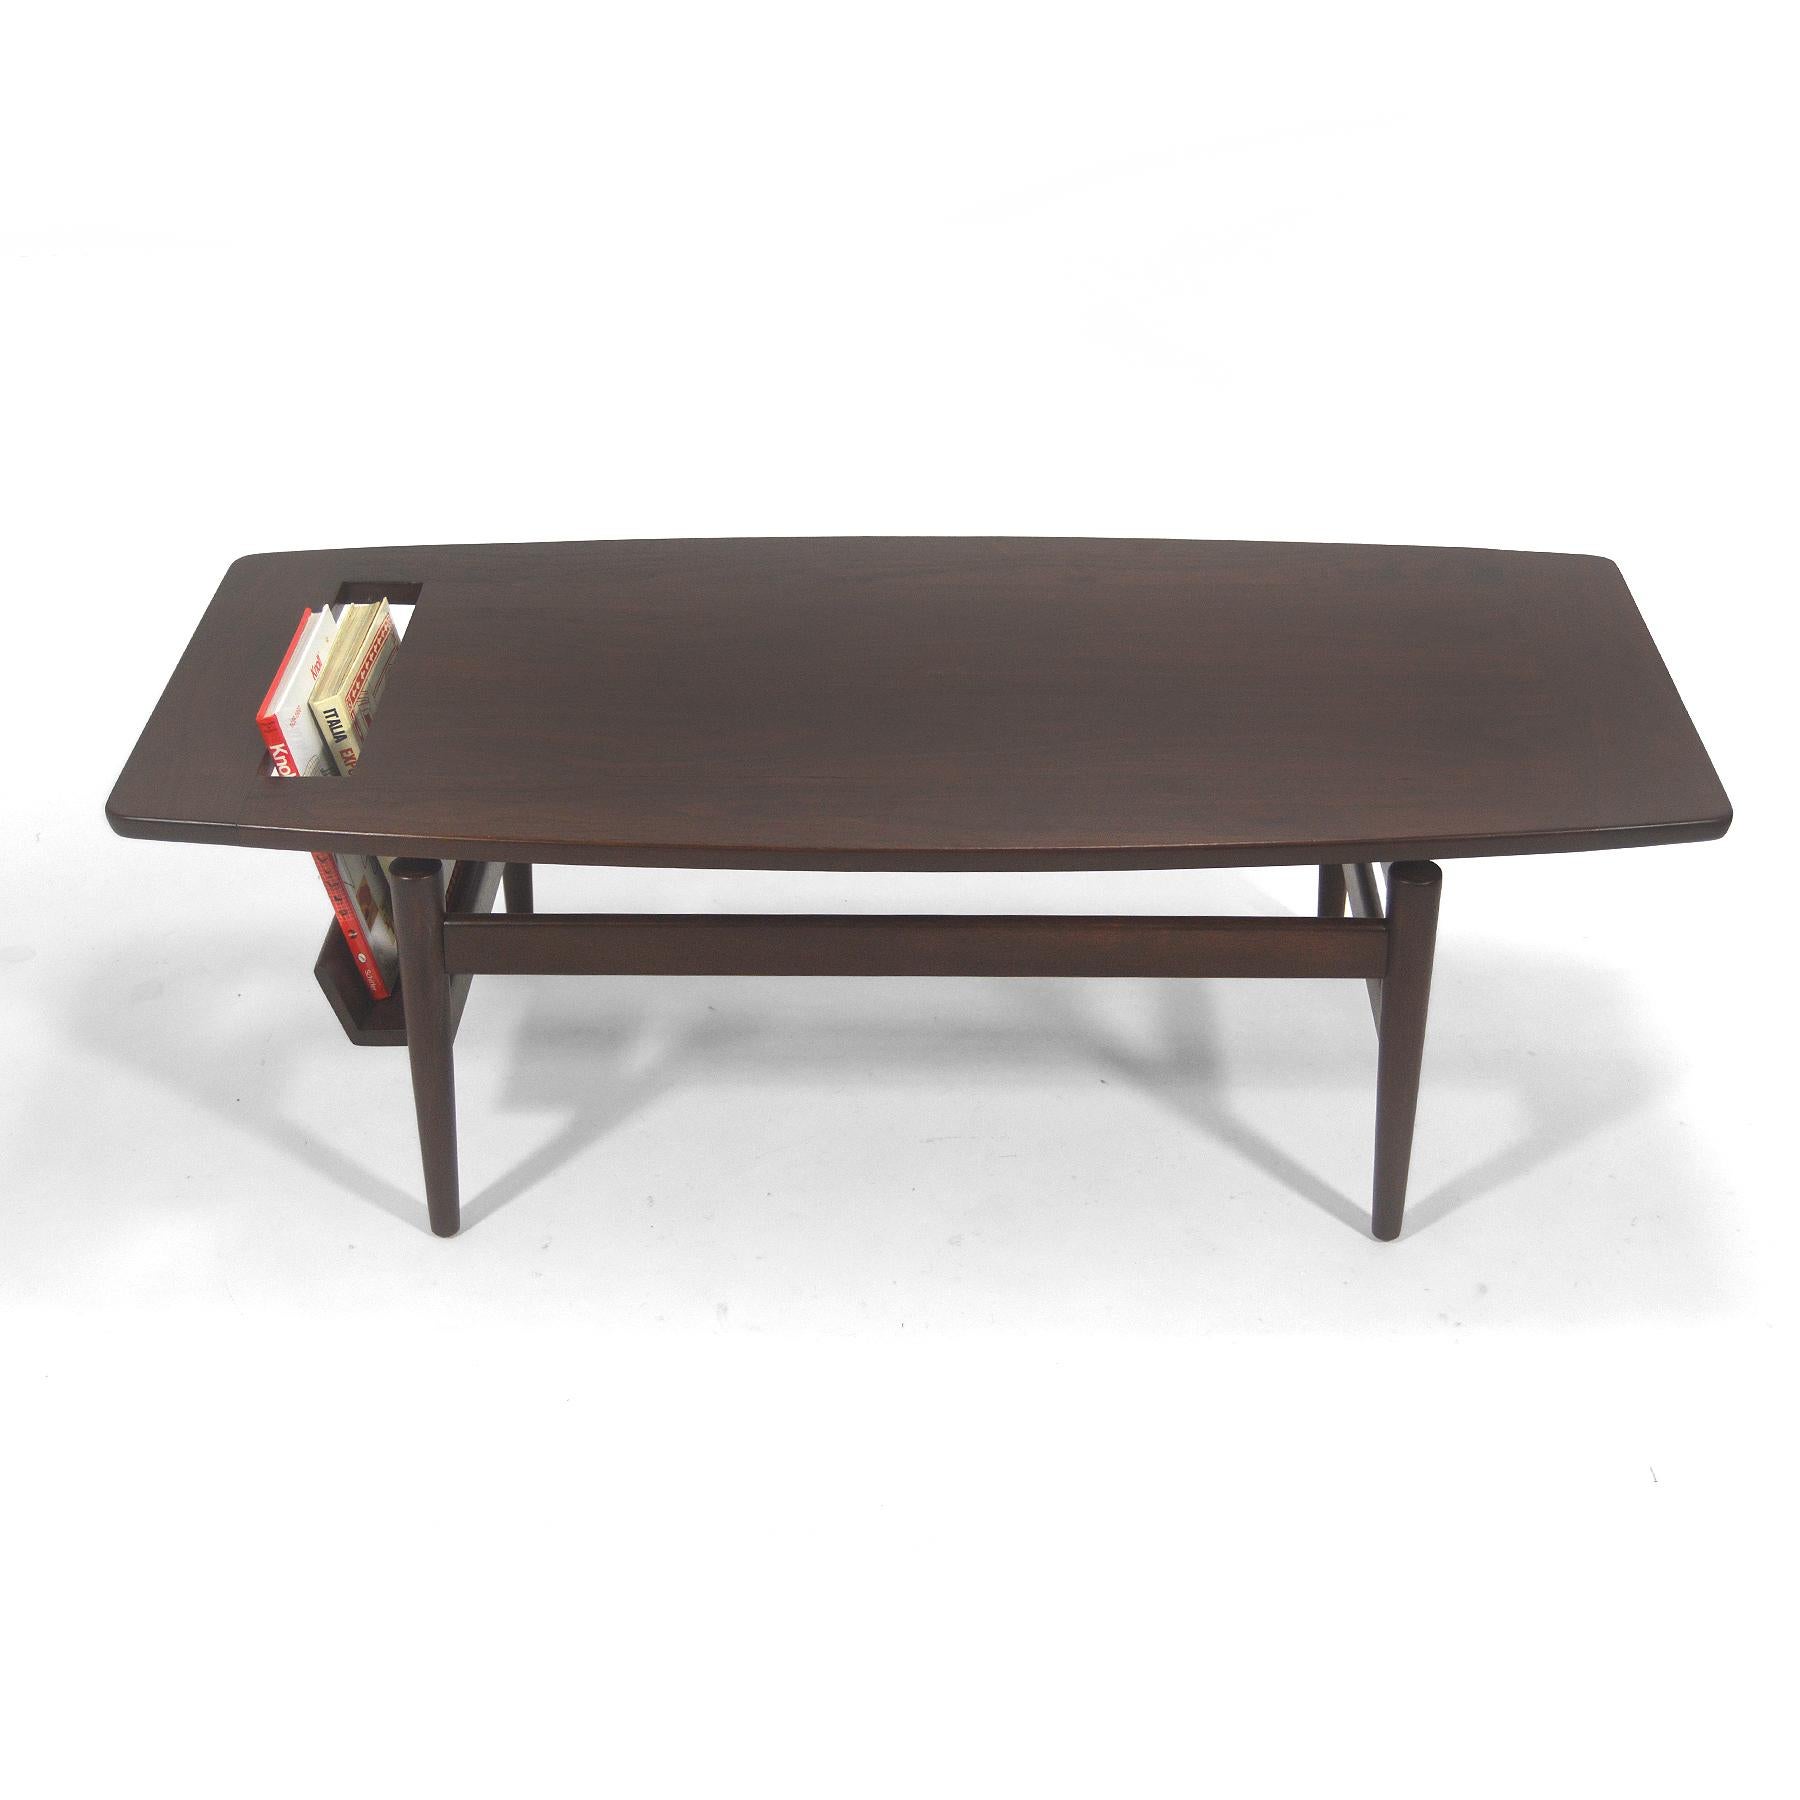 Jens Risom T 390 Coffee Table with Magazine Holder In Good Condition For Sale In Highland, IN